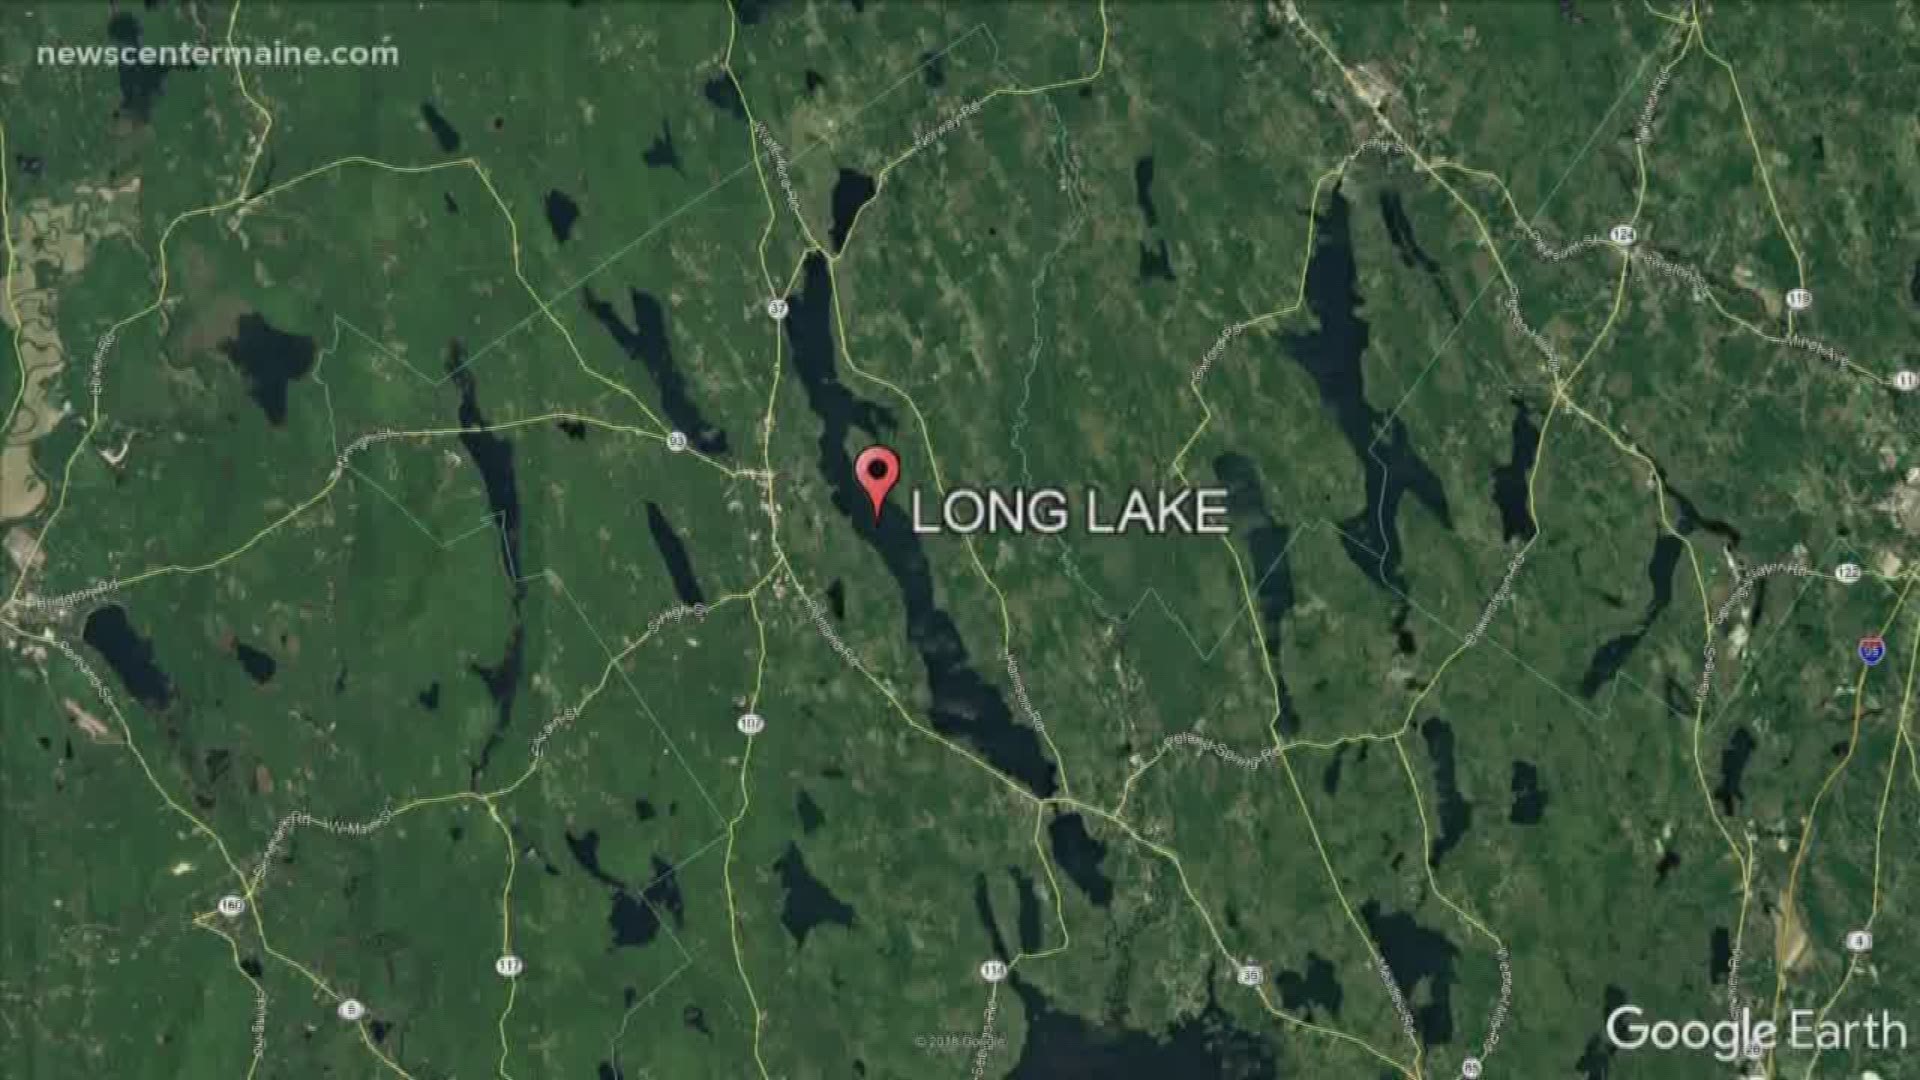 A 77-year-old couple were taken to the hospital with serious head injuries after a man attacked them in their Bridgton home Wednesday morning.